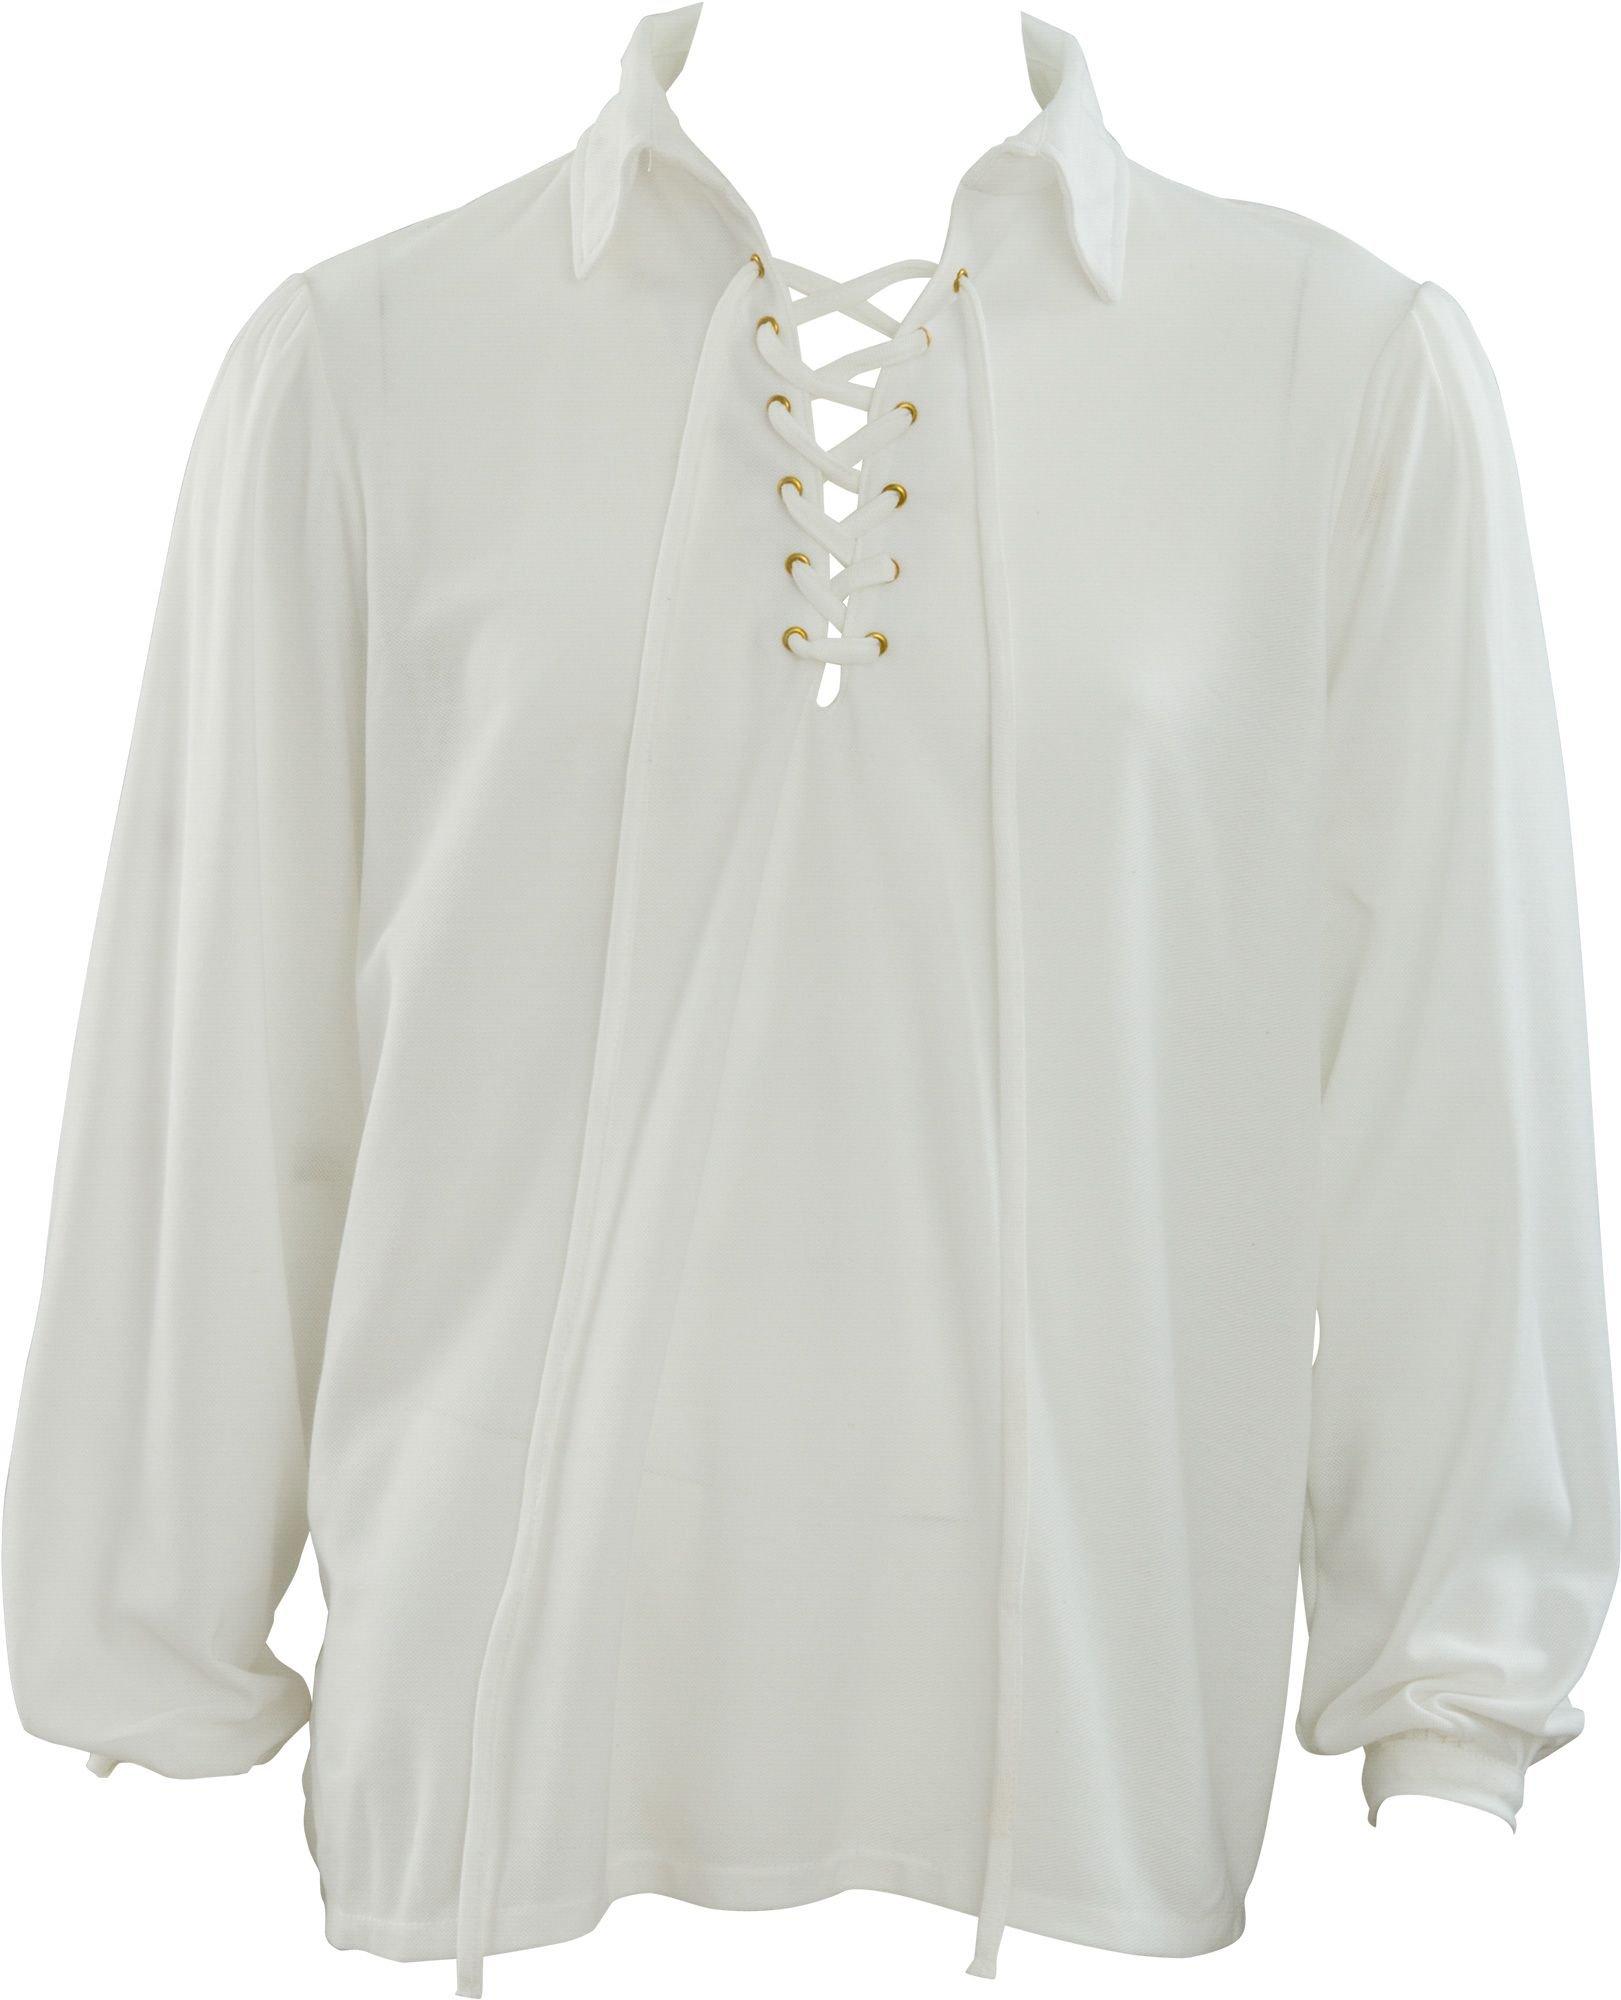 A1 Home Fancy Court Pirate Shirt White / S/M 42